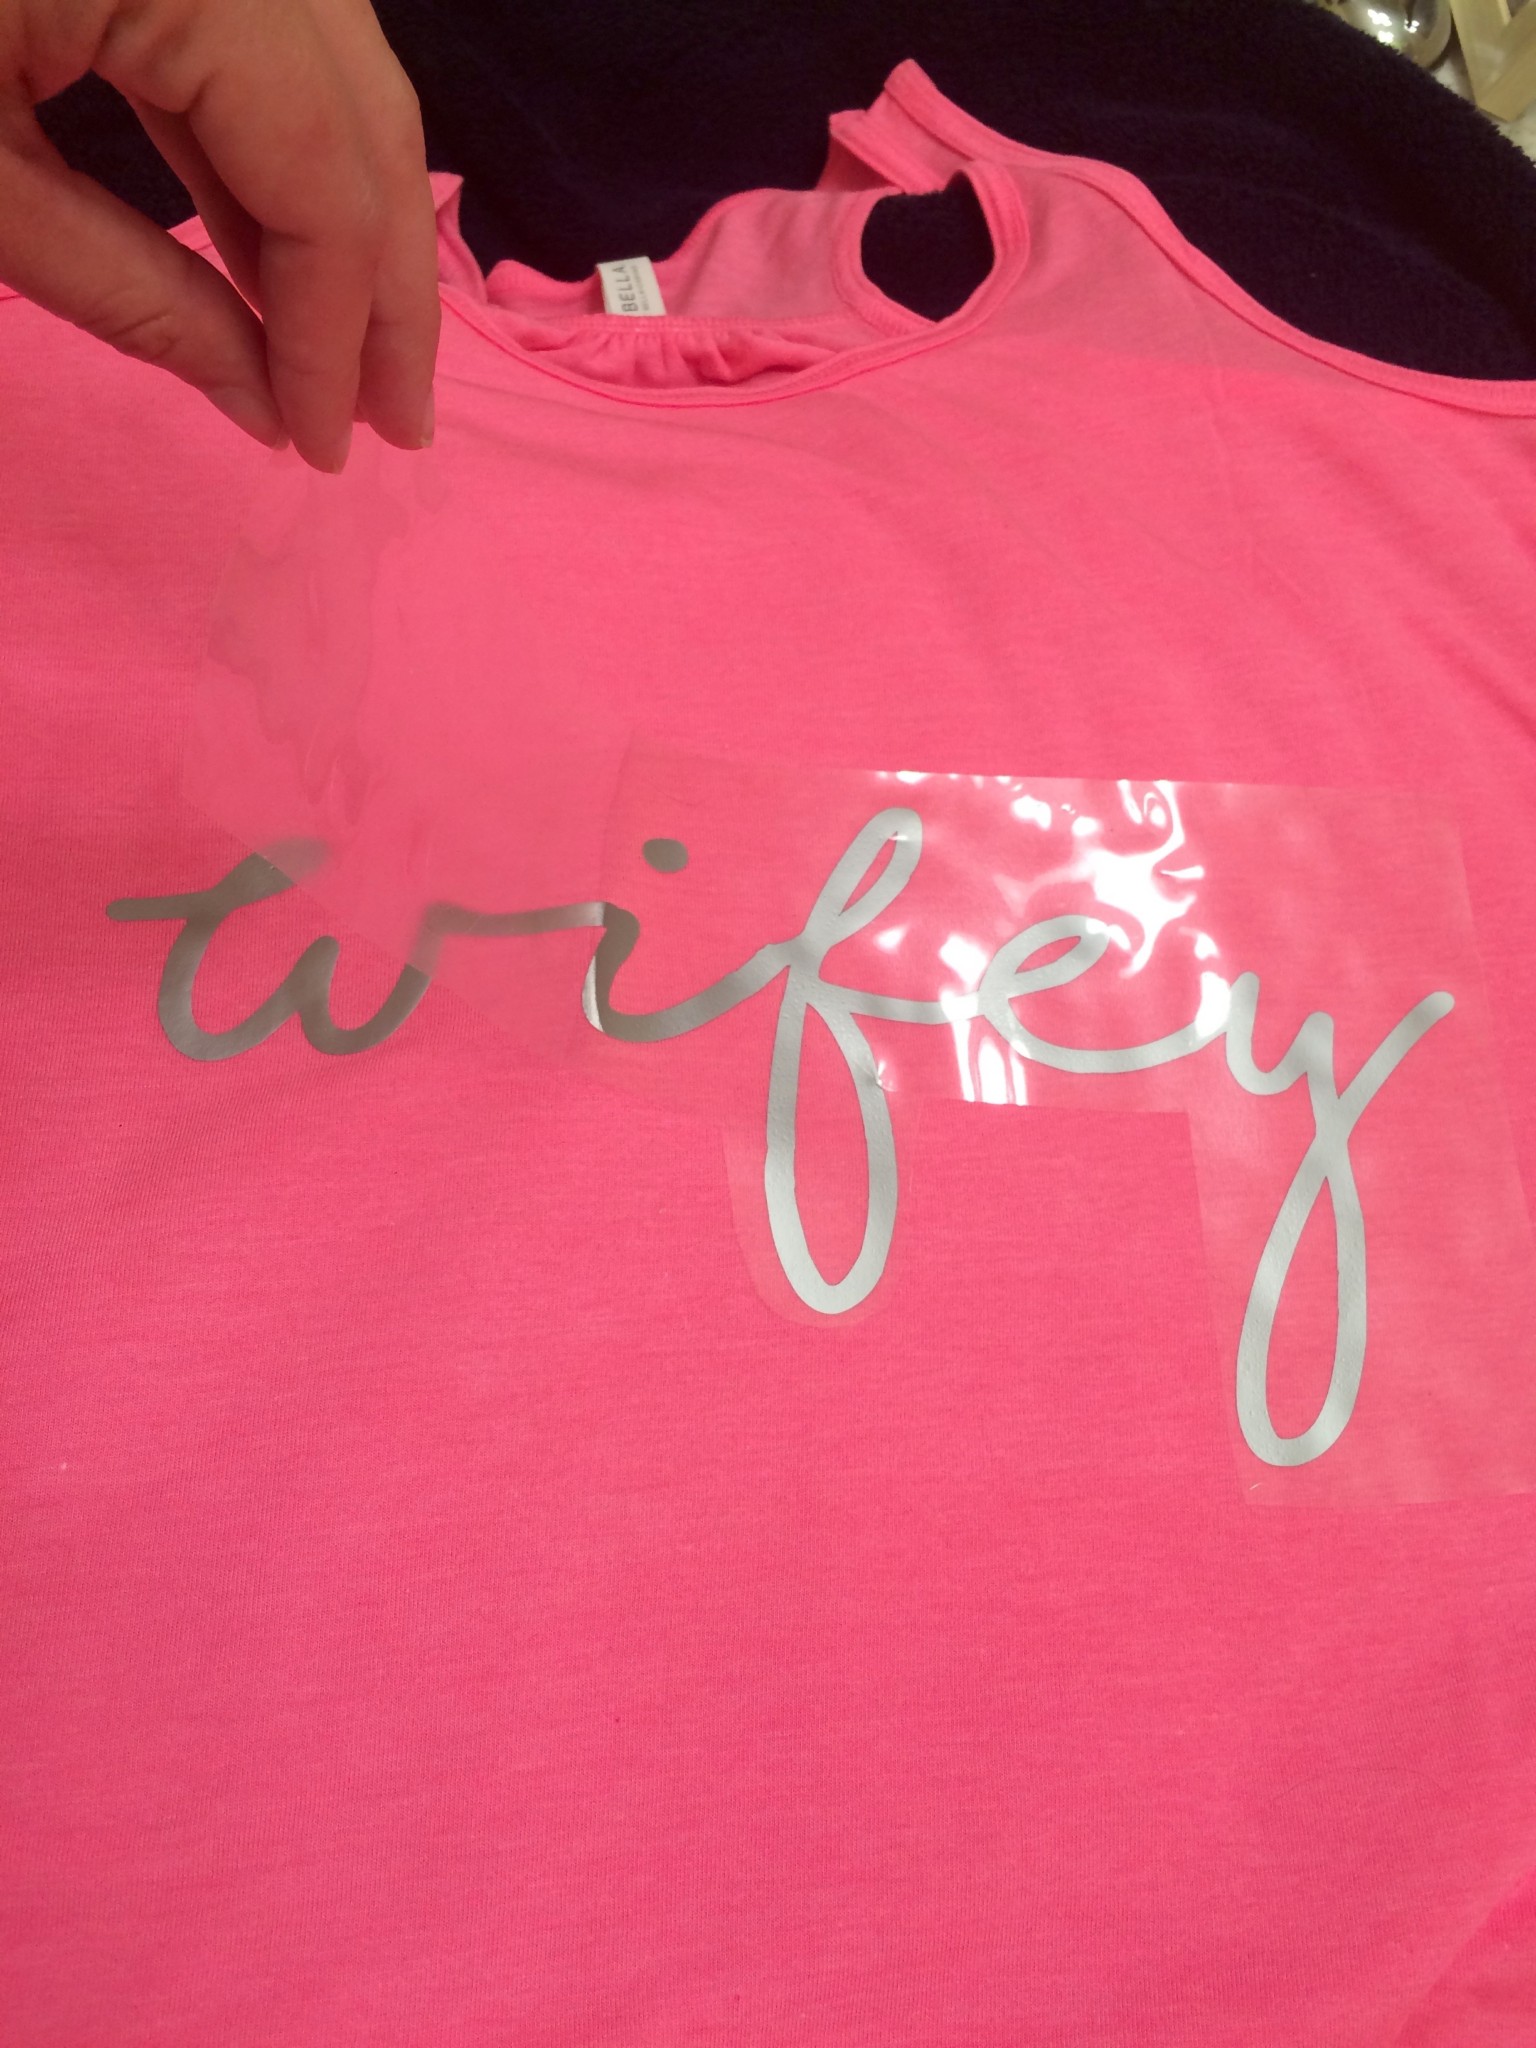 Make Your Own Wifey Tank